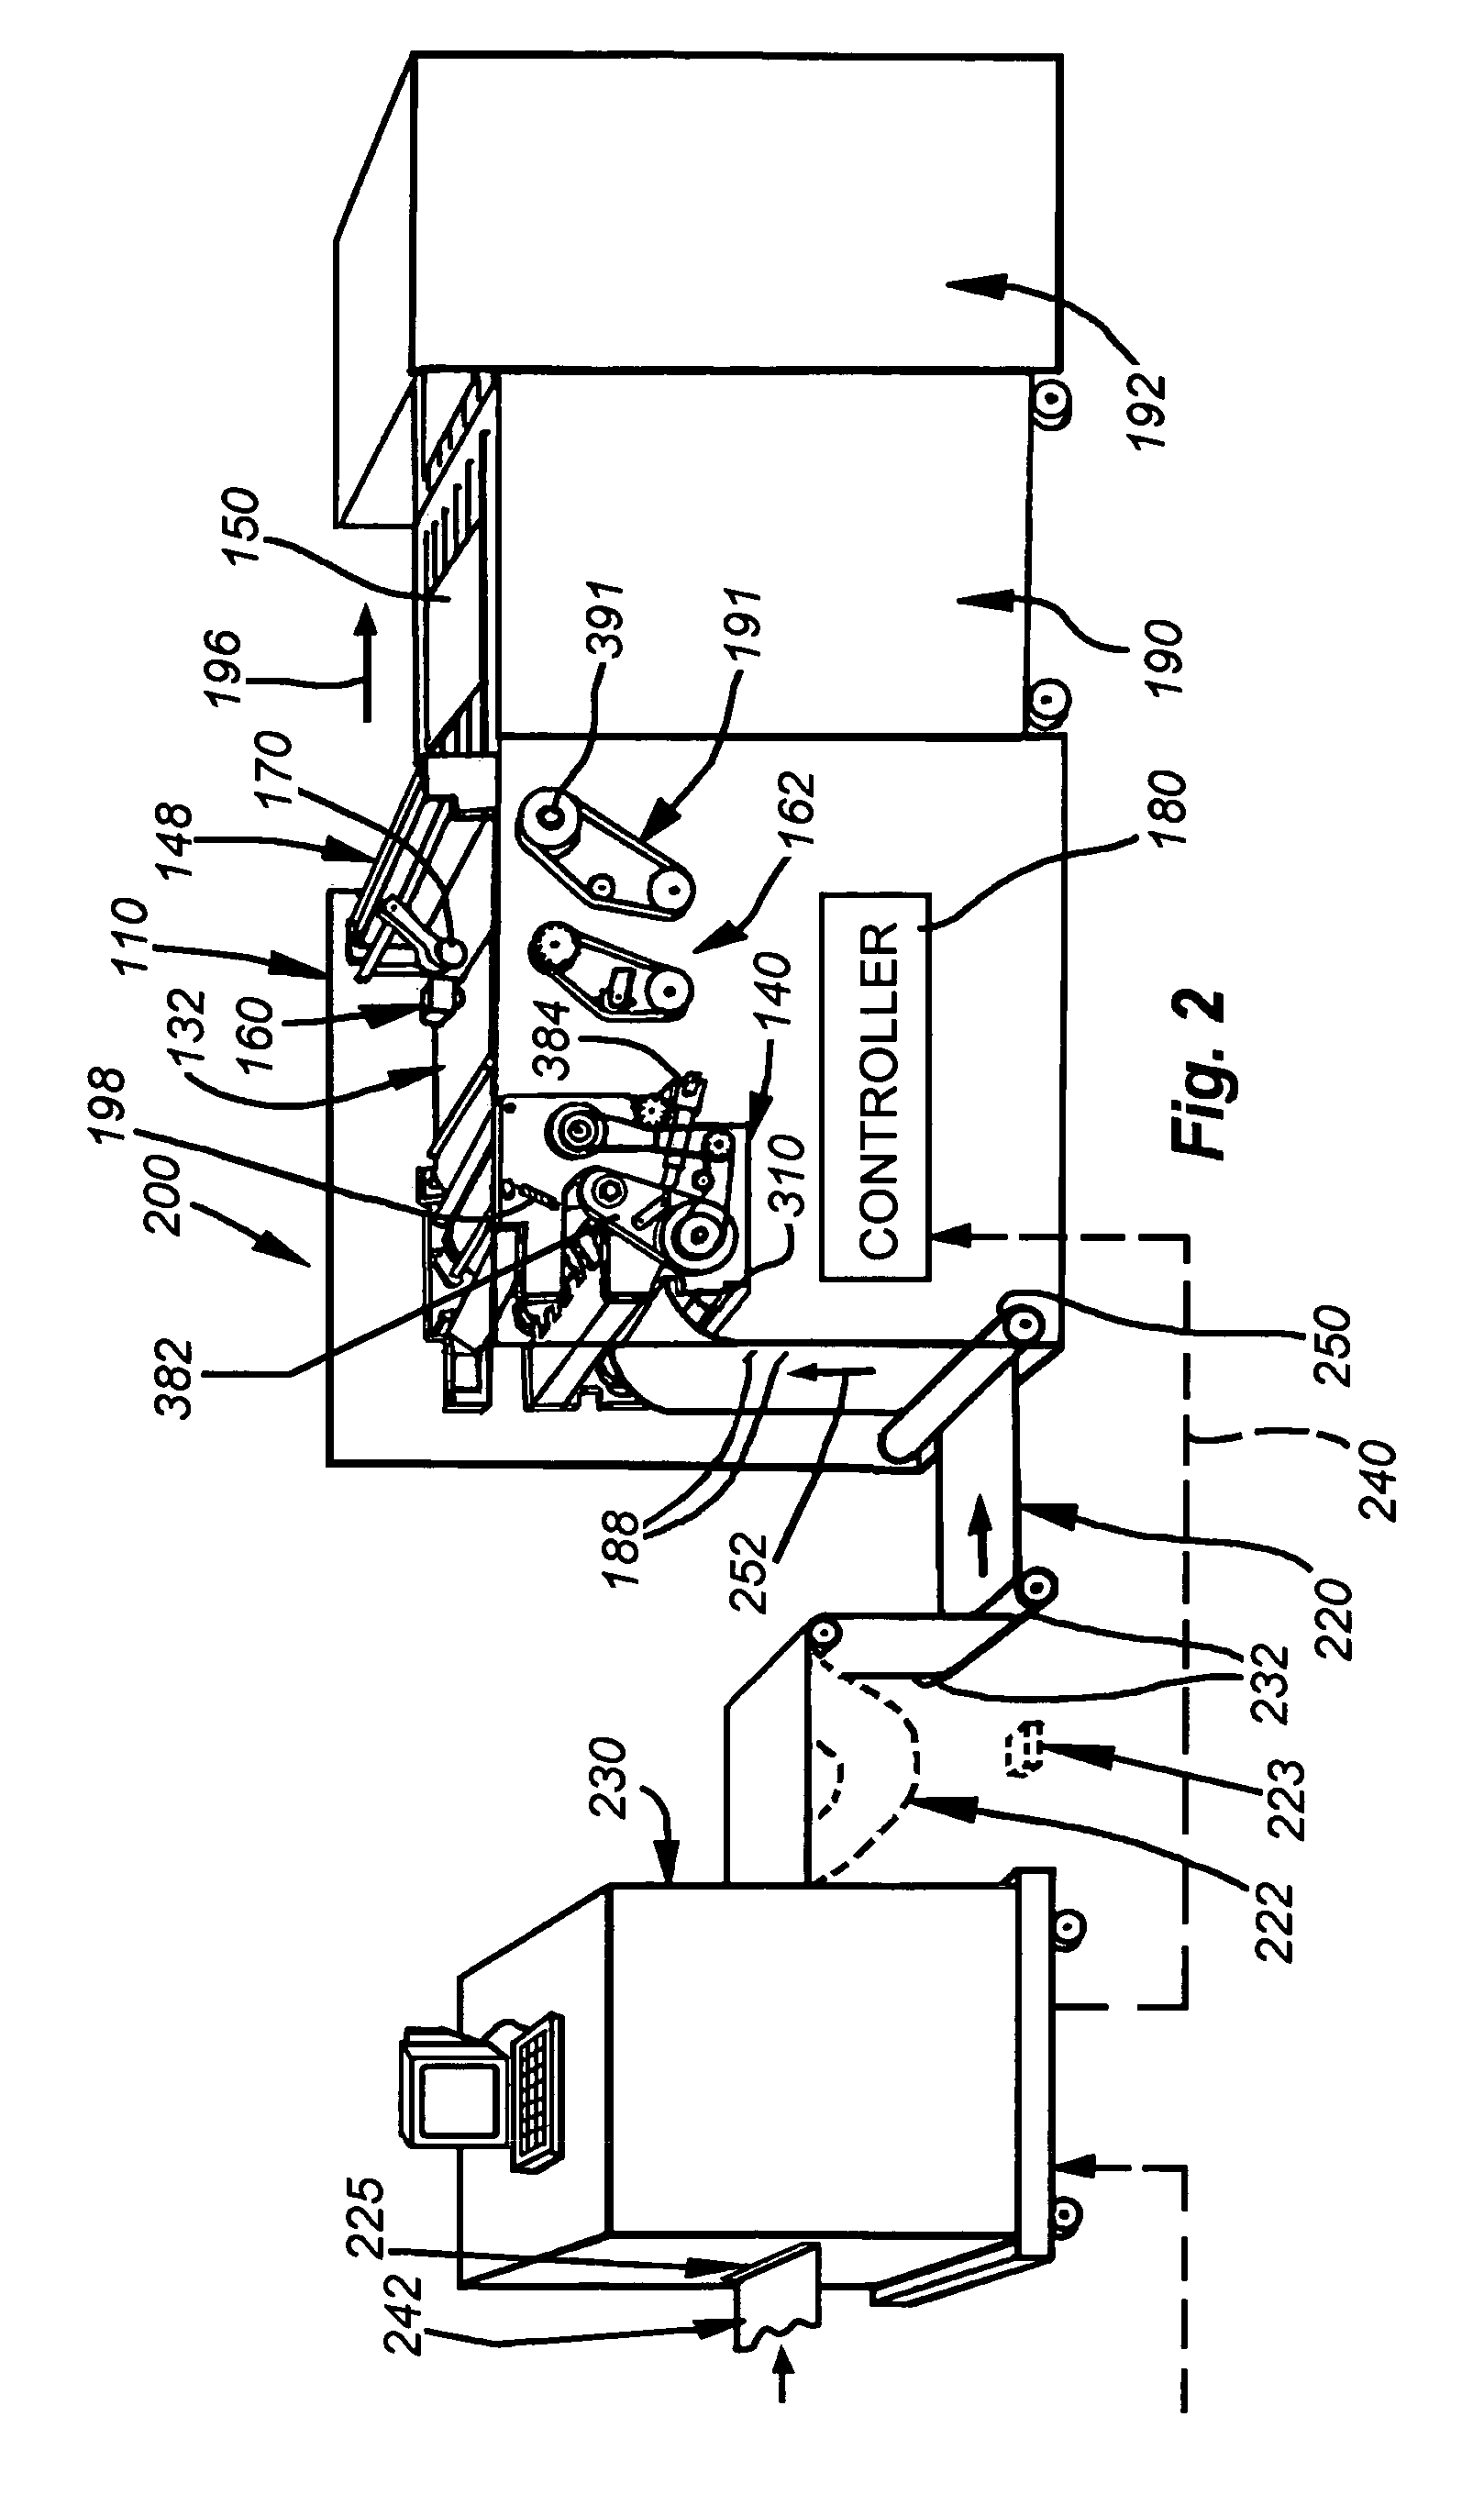 System and method for cutting continuous web